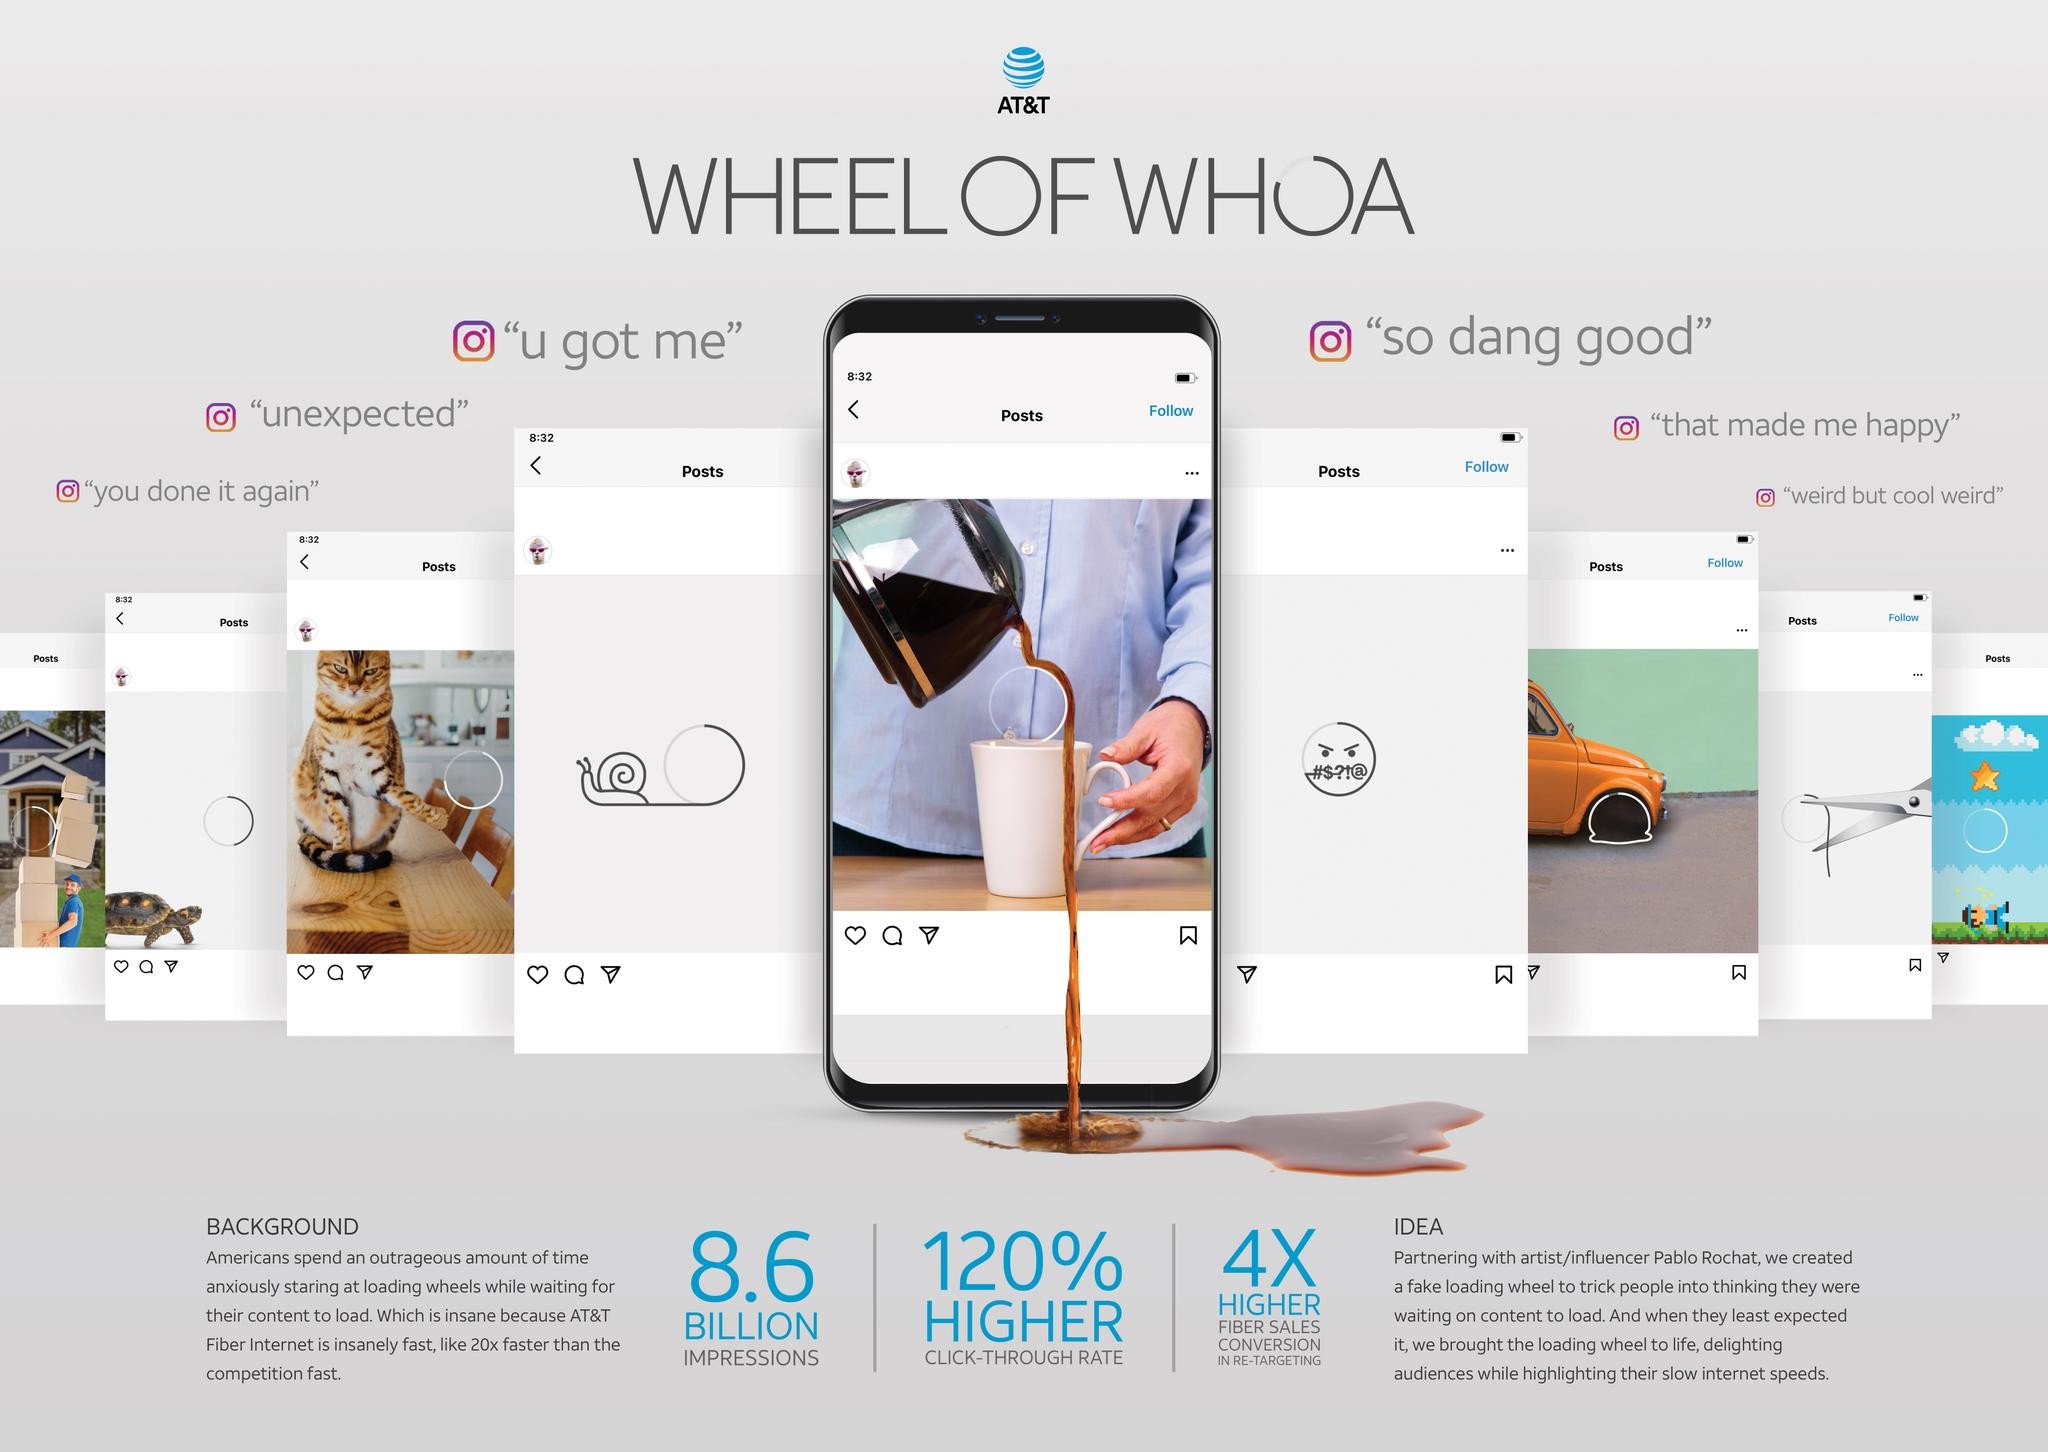 Wheel of Whoa by AT&T